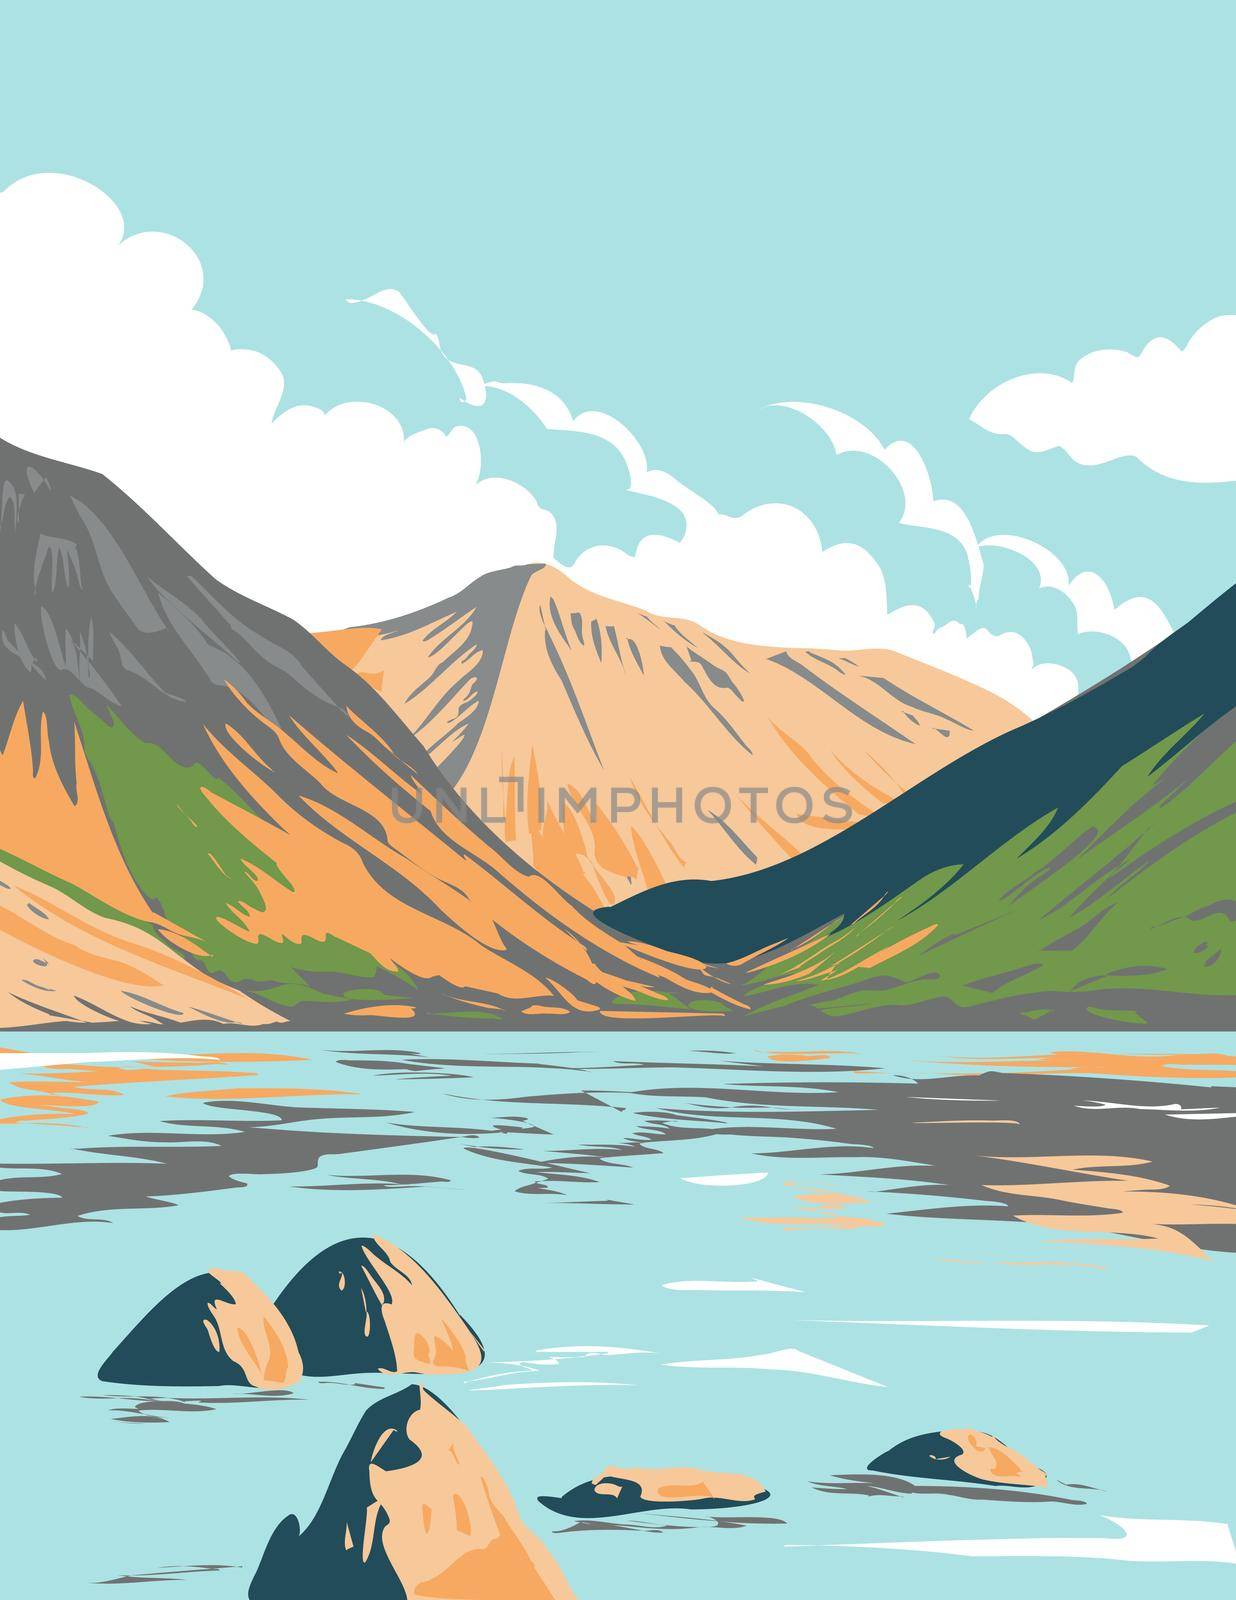 Art Deco or WPA poster of Wasdale Head and Wast Water in the Lake District National Park in Cumbria, England, UK done in works project administration style.